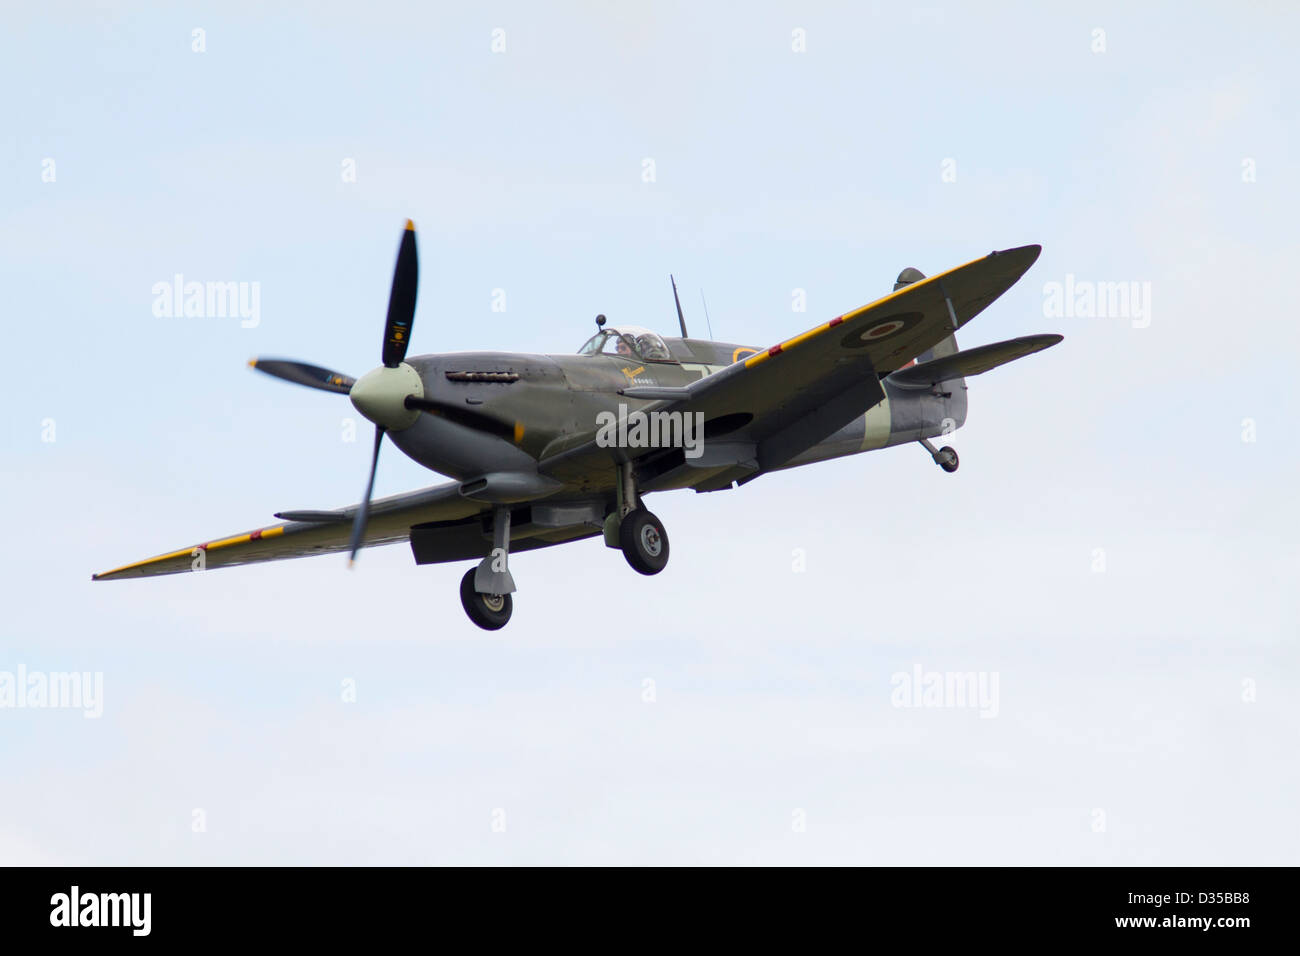 Royal Air Force Spitfire airplane in flight Stock Photo